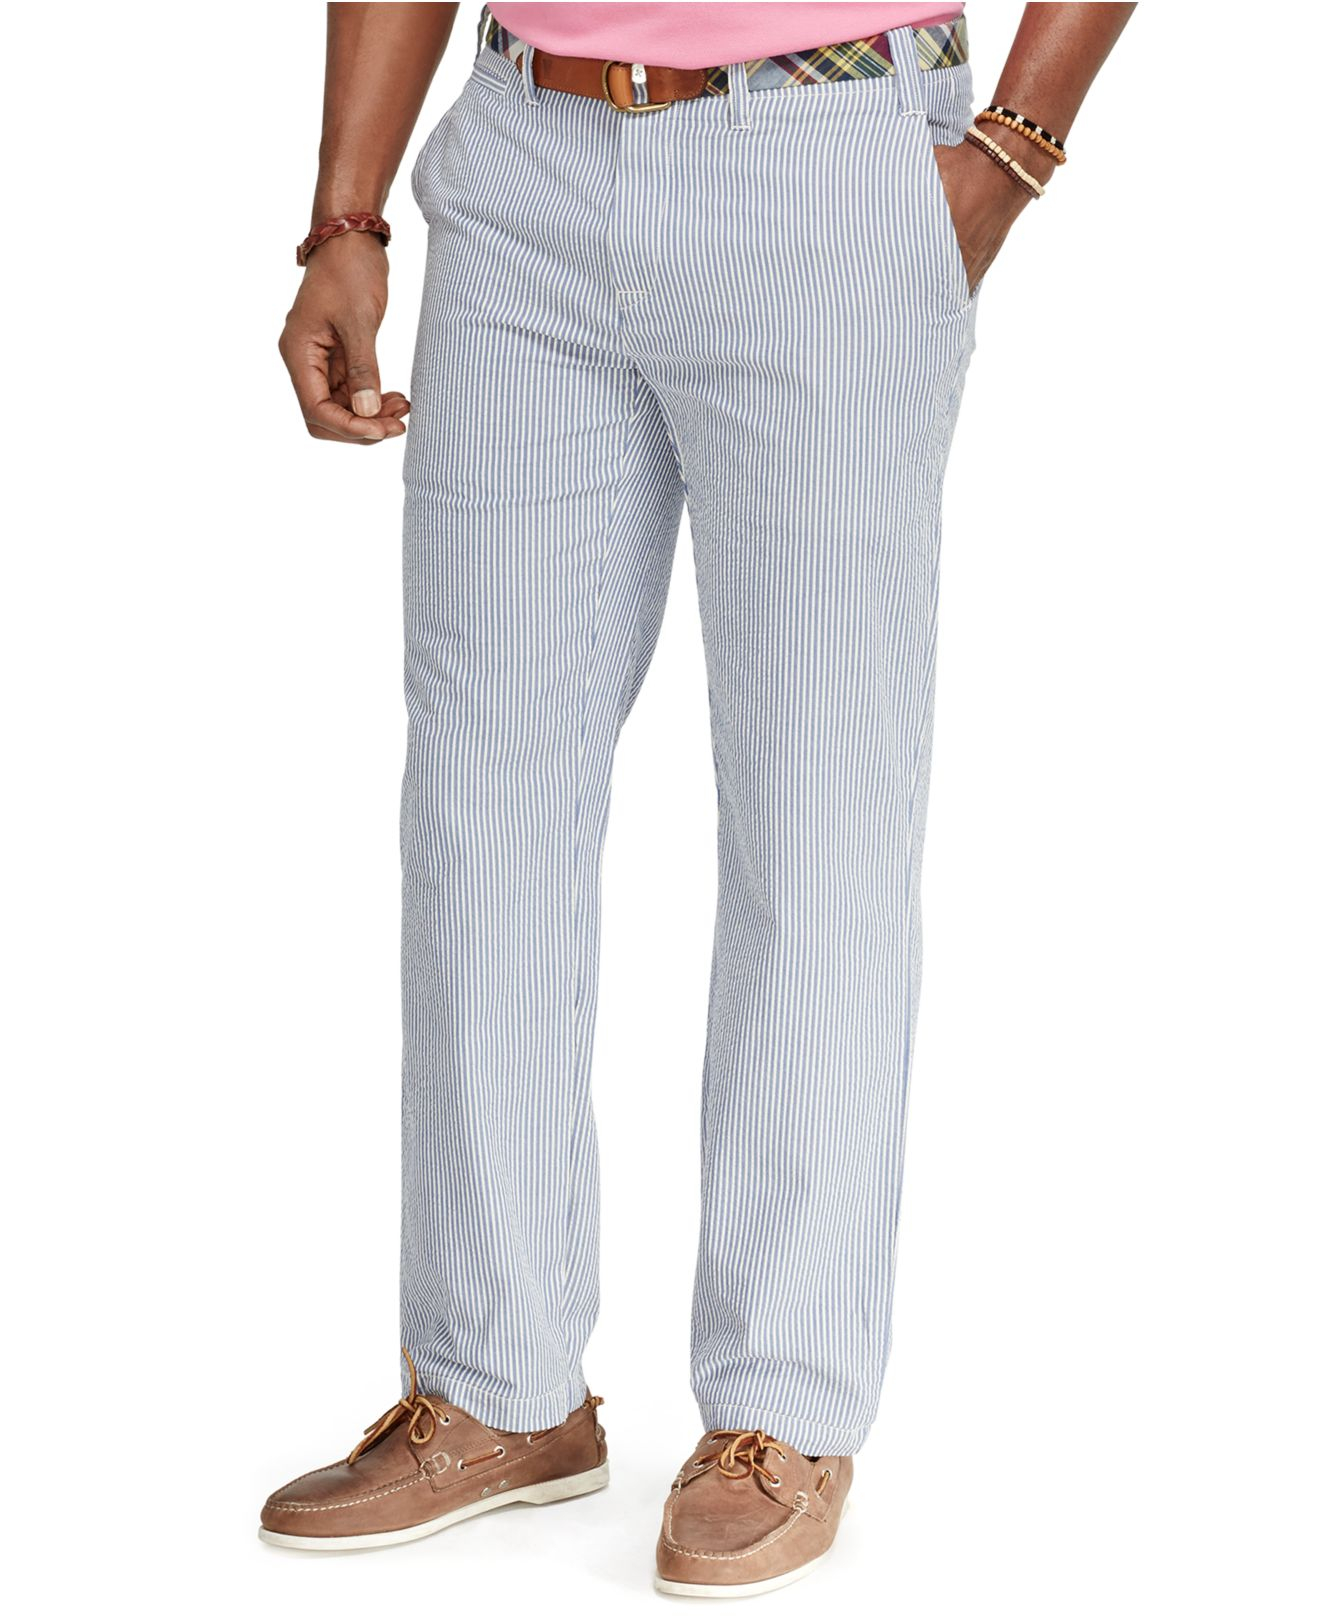 Polo Ralph Lauren Big And Tall Flat-Front Seersucker Pants in Navy/White  (Blue) for Men - Lyst